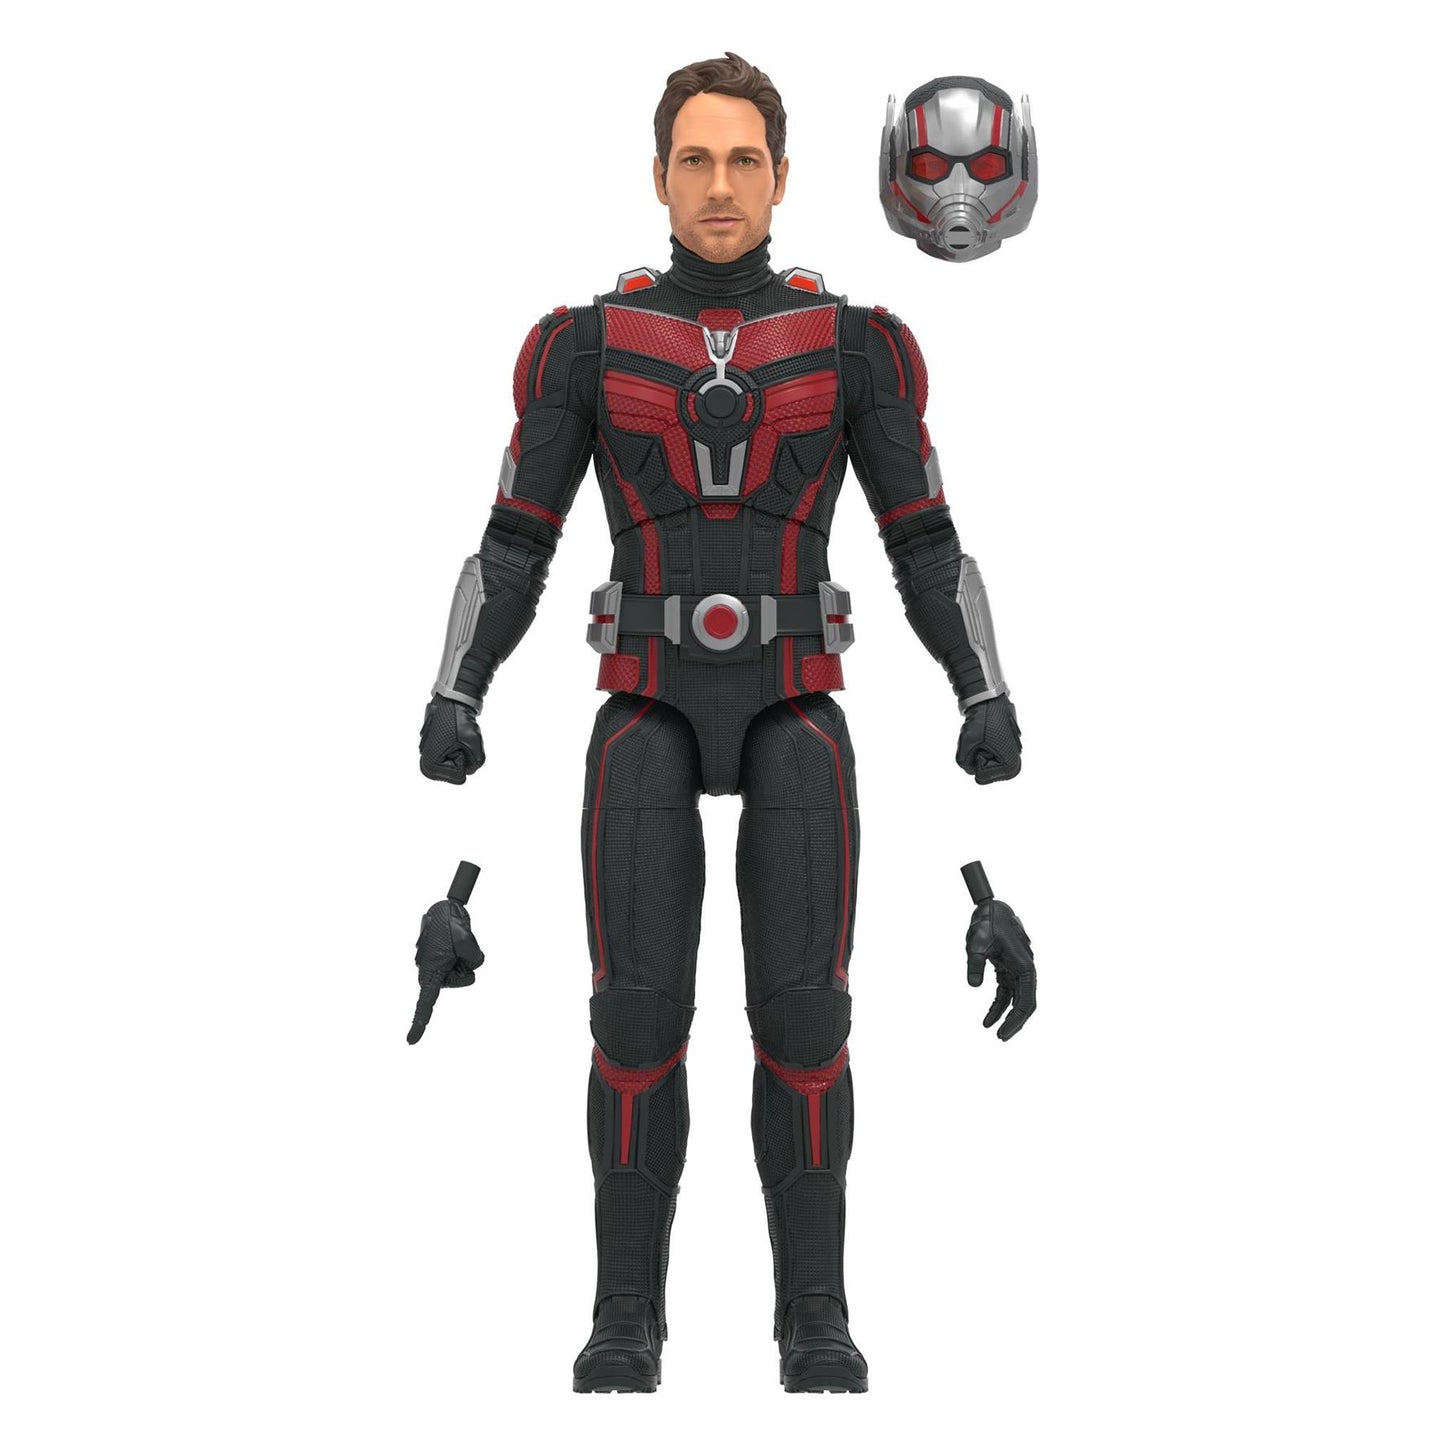 Ant-man Movie Legends Ant-man 6in Action Figure